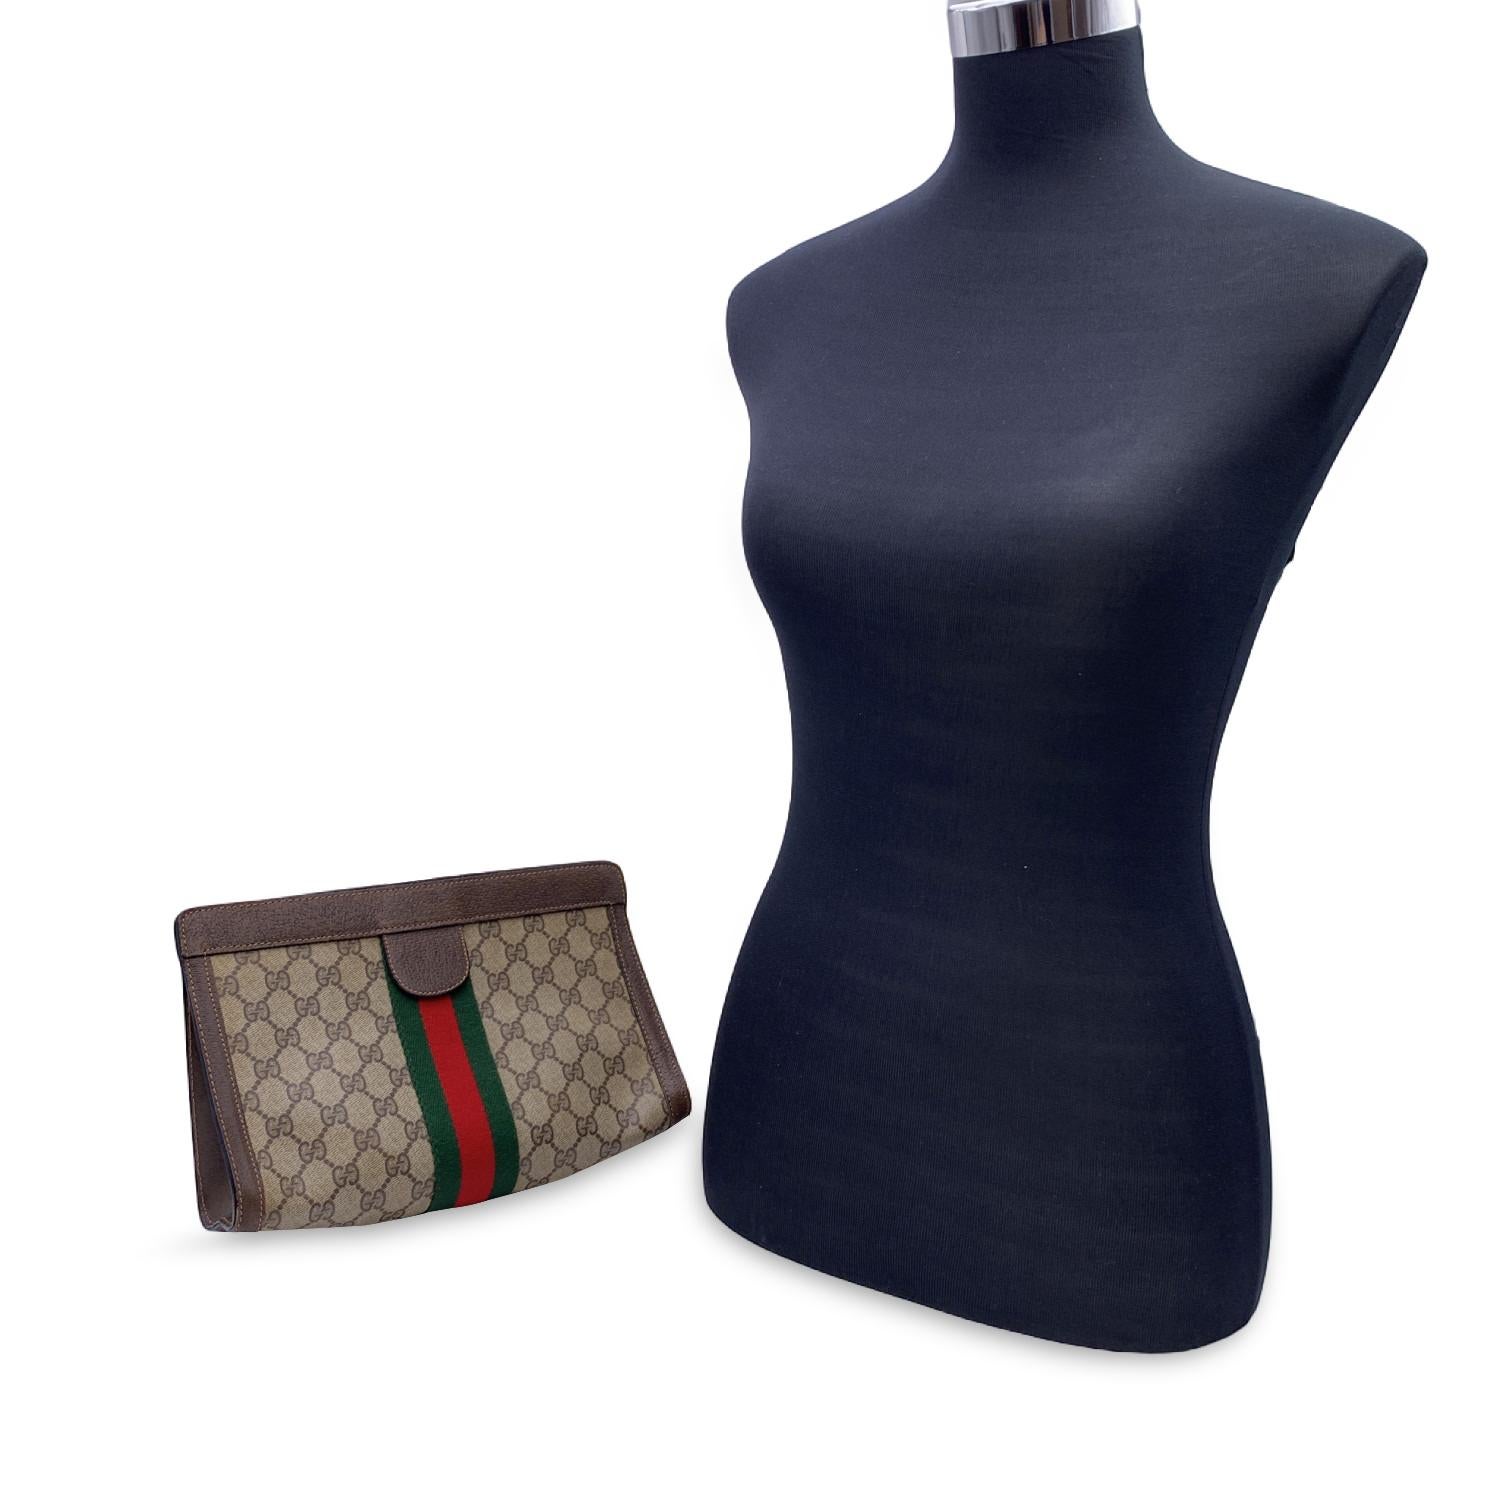 Gucci Vintage Brown Monogram Canvas Cosmetic Bag Clutch with Stripe. Brown Monogram Canvas with Genuine Leather trim. Green/Red/Green stripes around the bag. Upper hook and loop closure. Waterproof lining. 